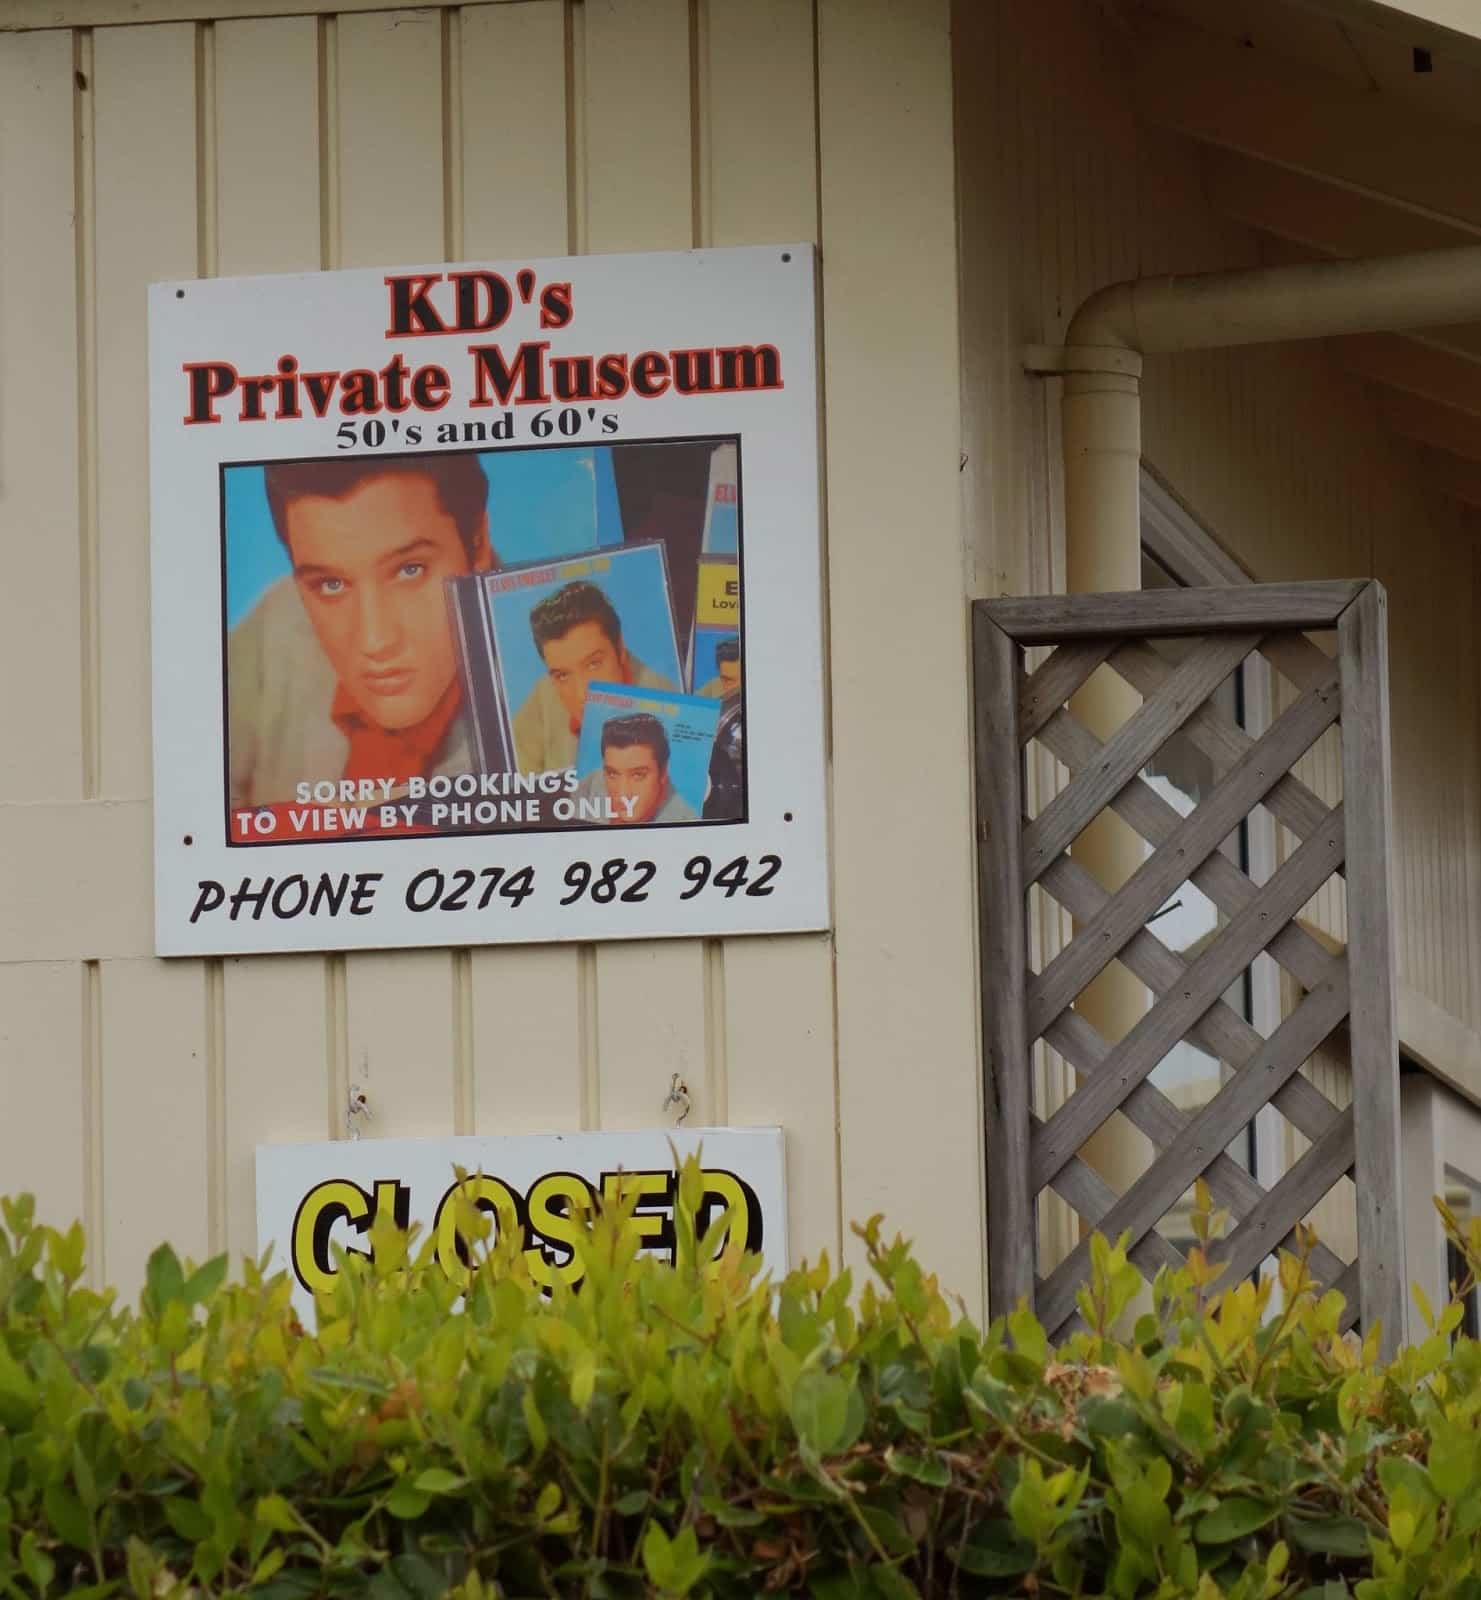 DIY popular music archives and museums: Elvis in New Zealand